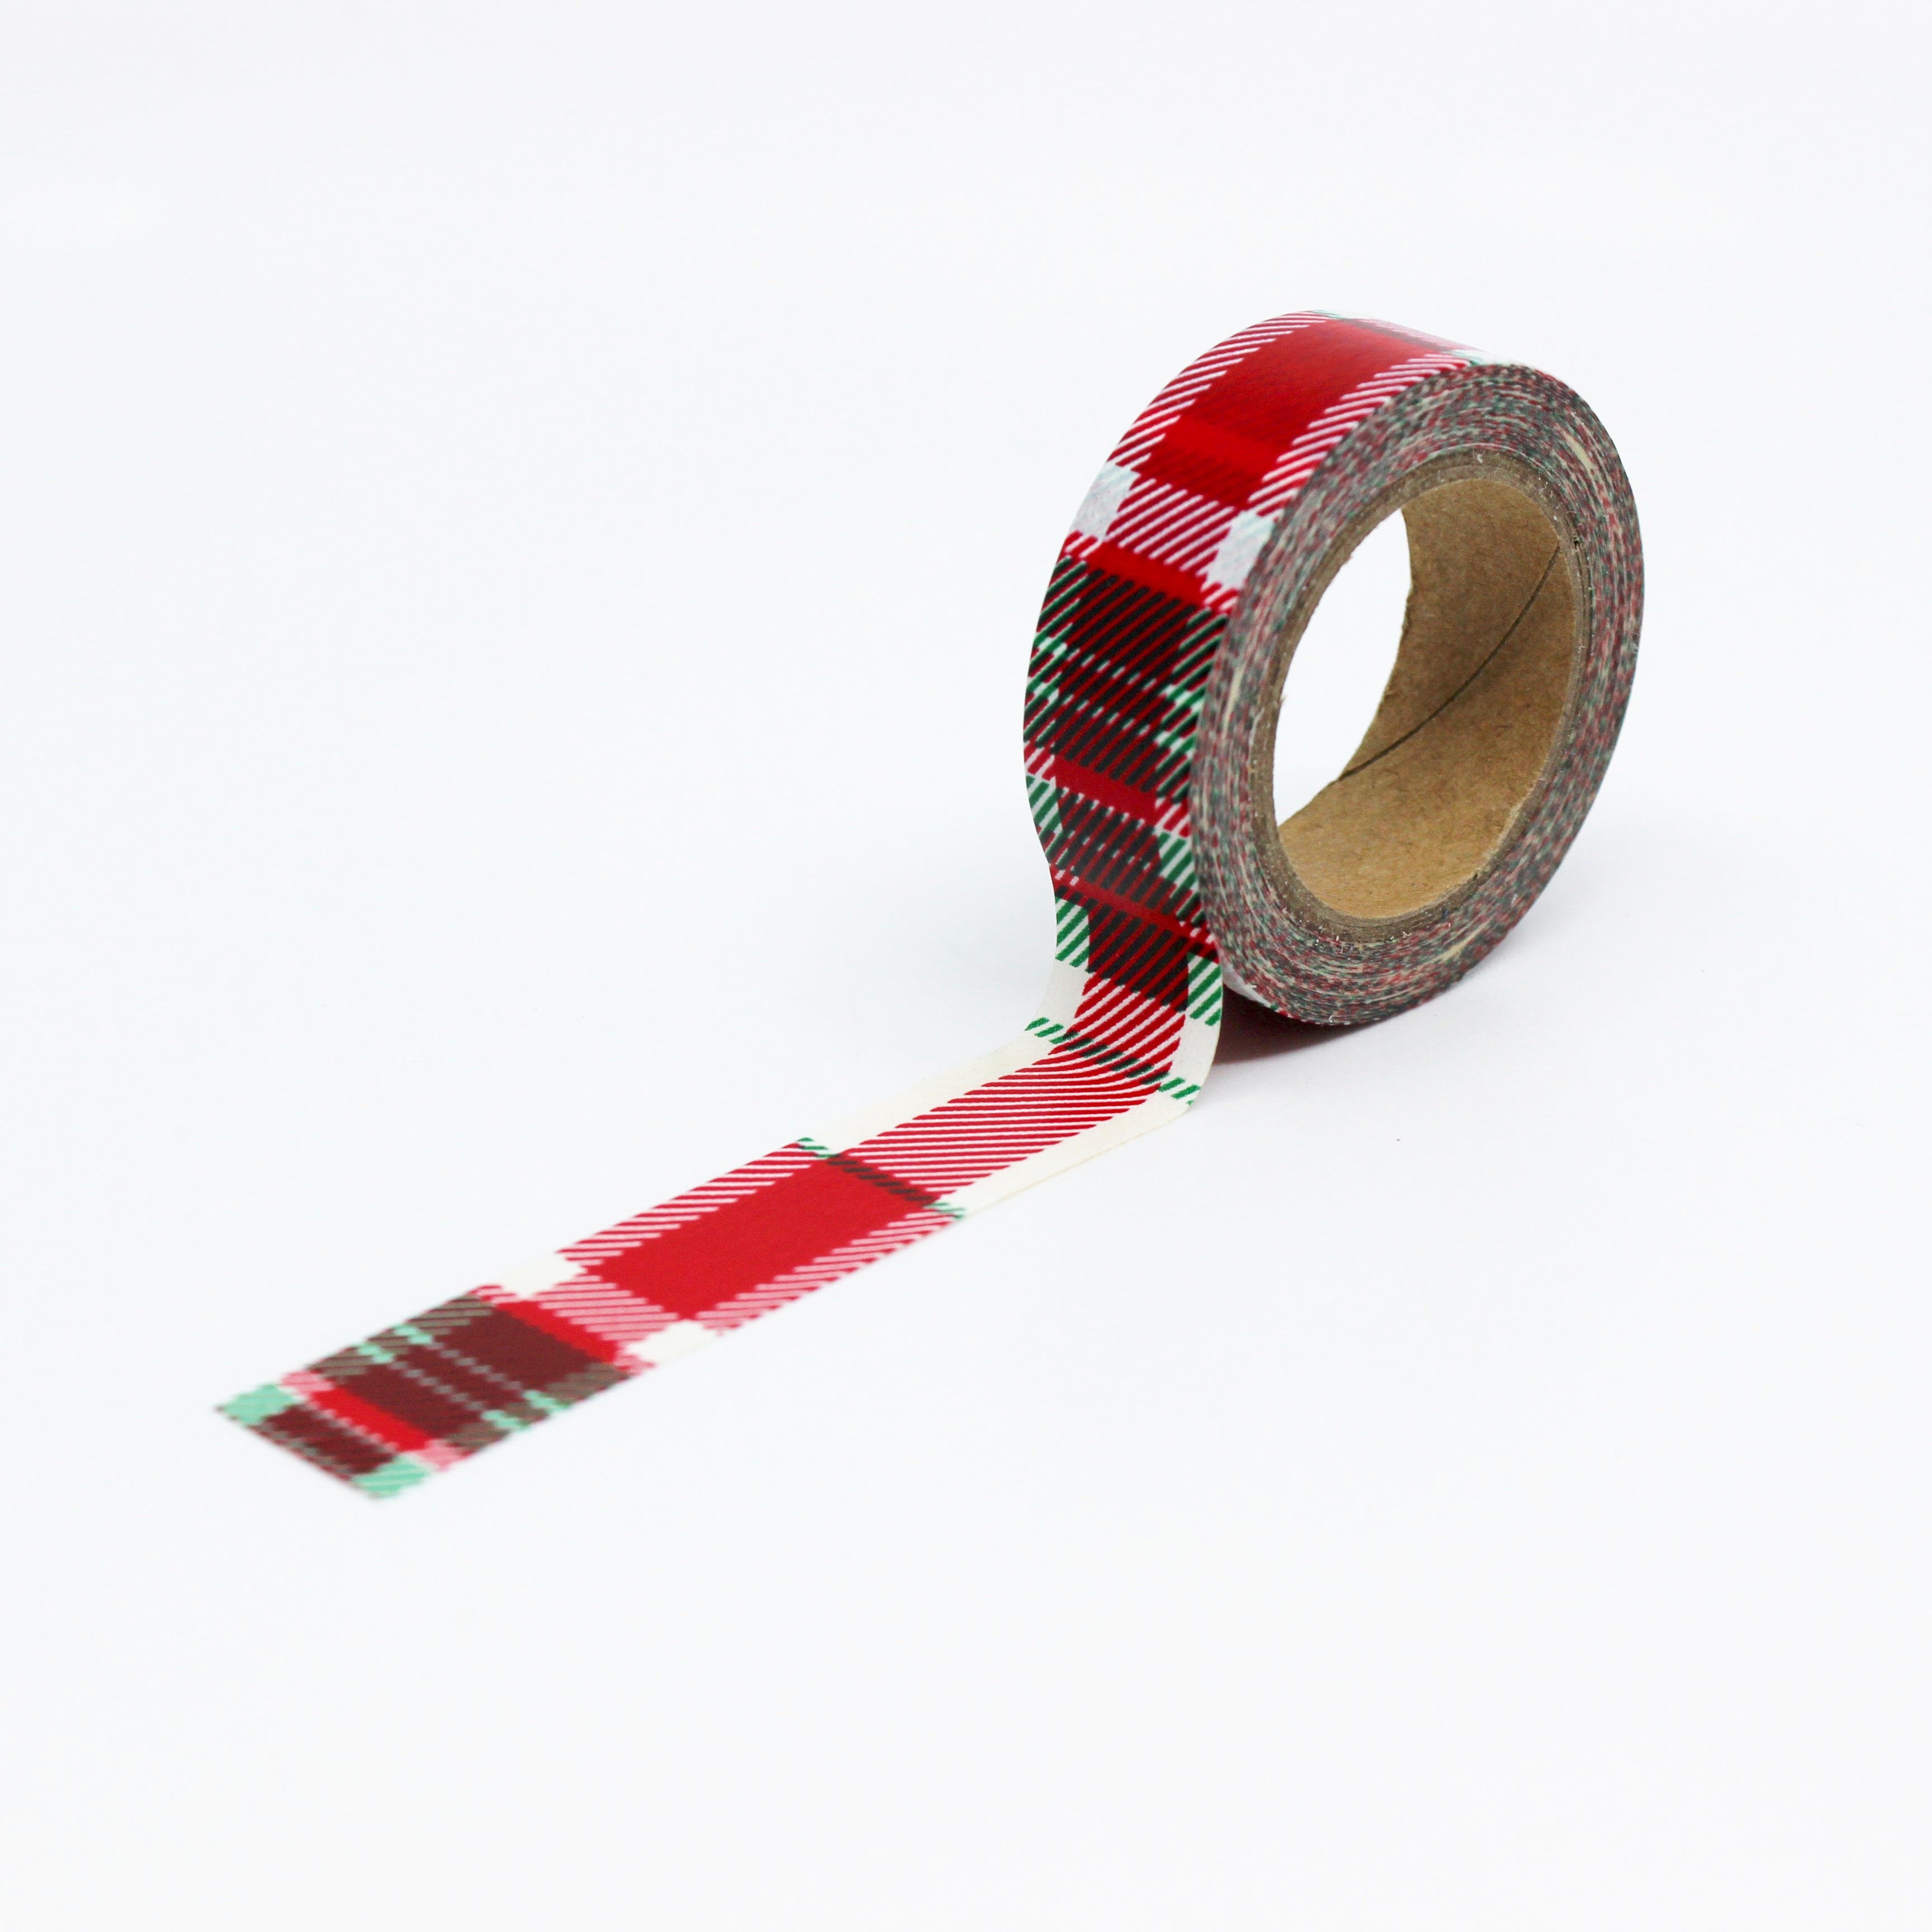 This is a full pattern repeat view of red, green and white holiday plaid washi tape BBB Supplies Craft Shop